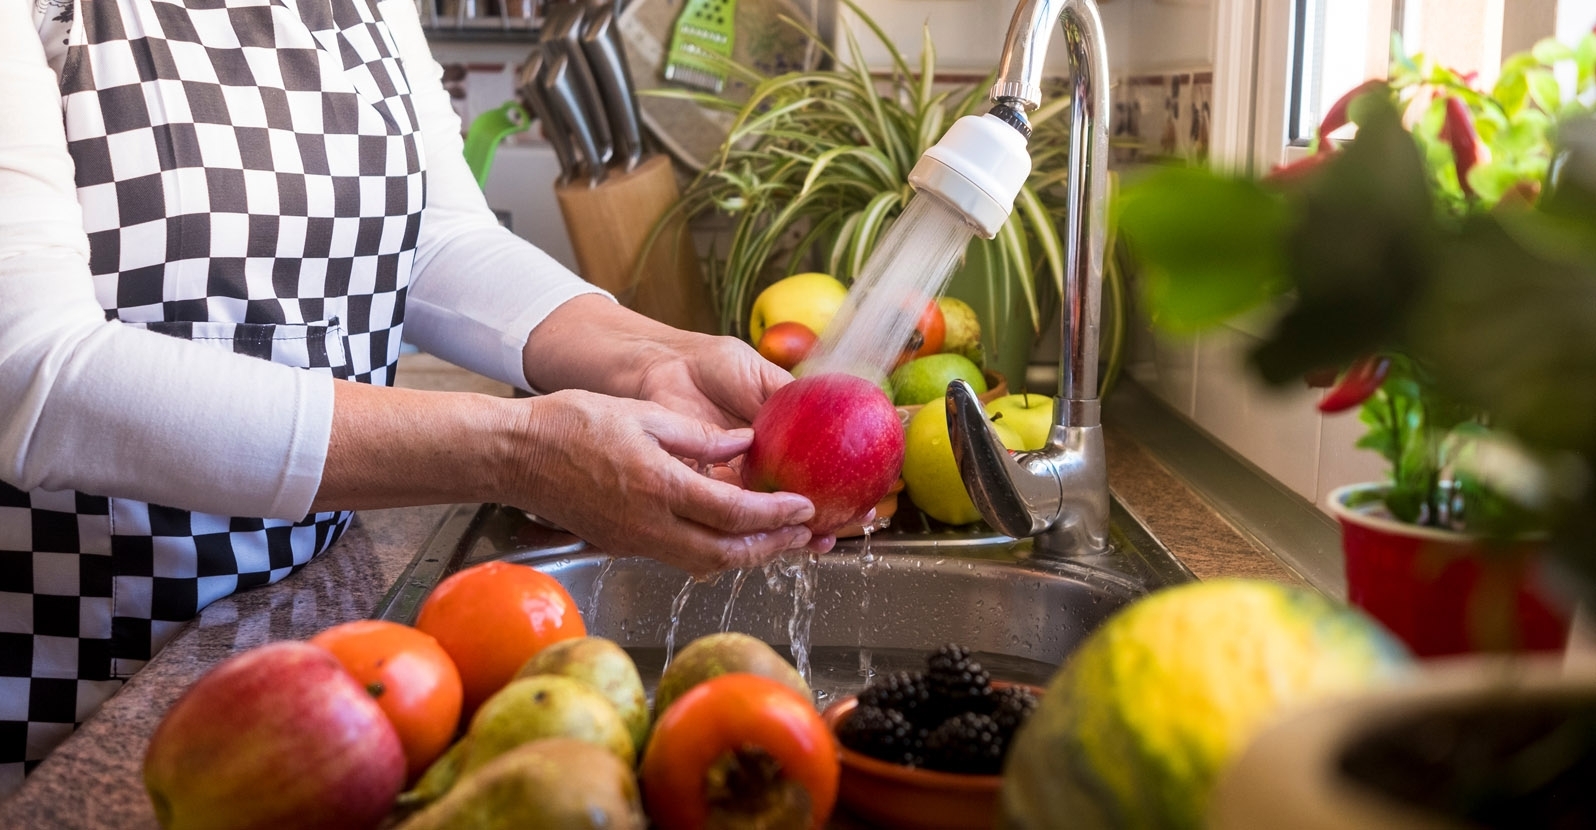 How To Clean Your Fruits And Vegetables